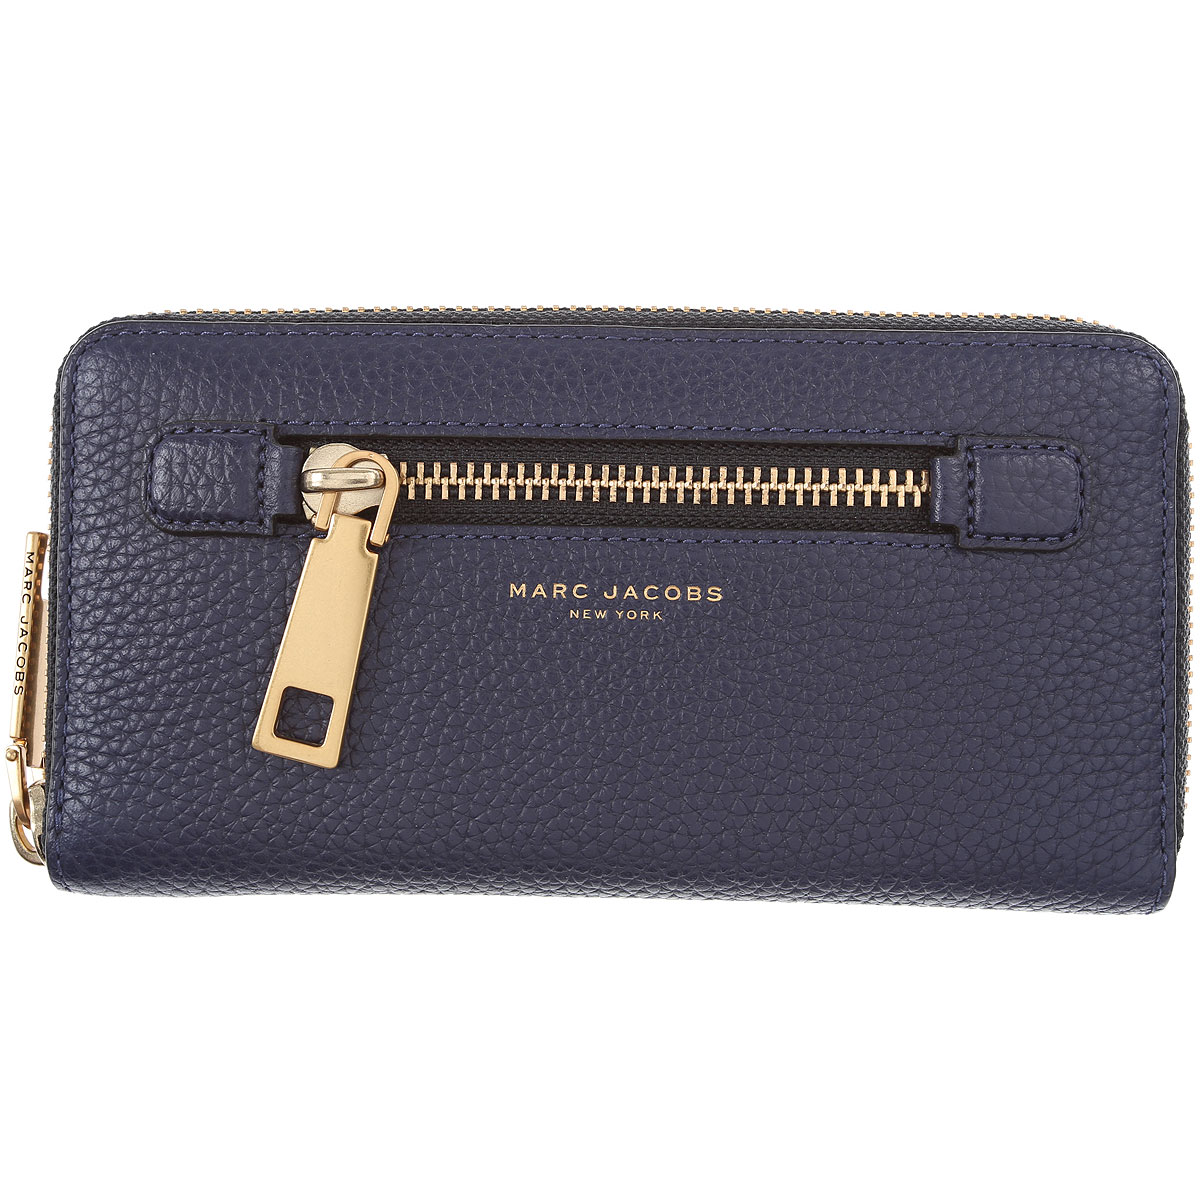 Womens Wallets Marc Jacobs, Style code: m0008449-415-